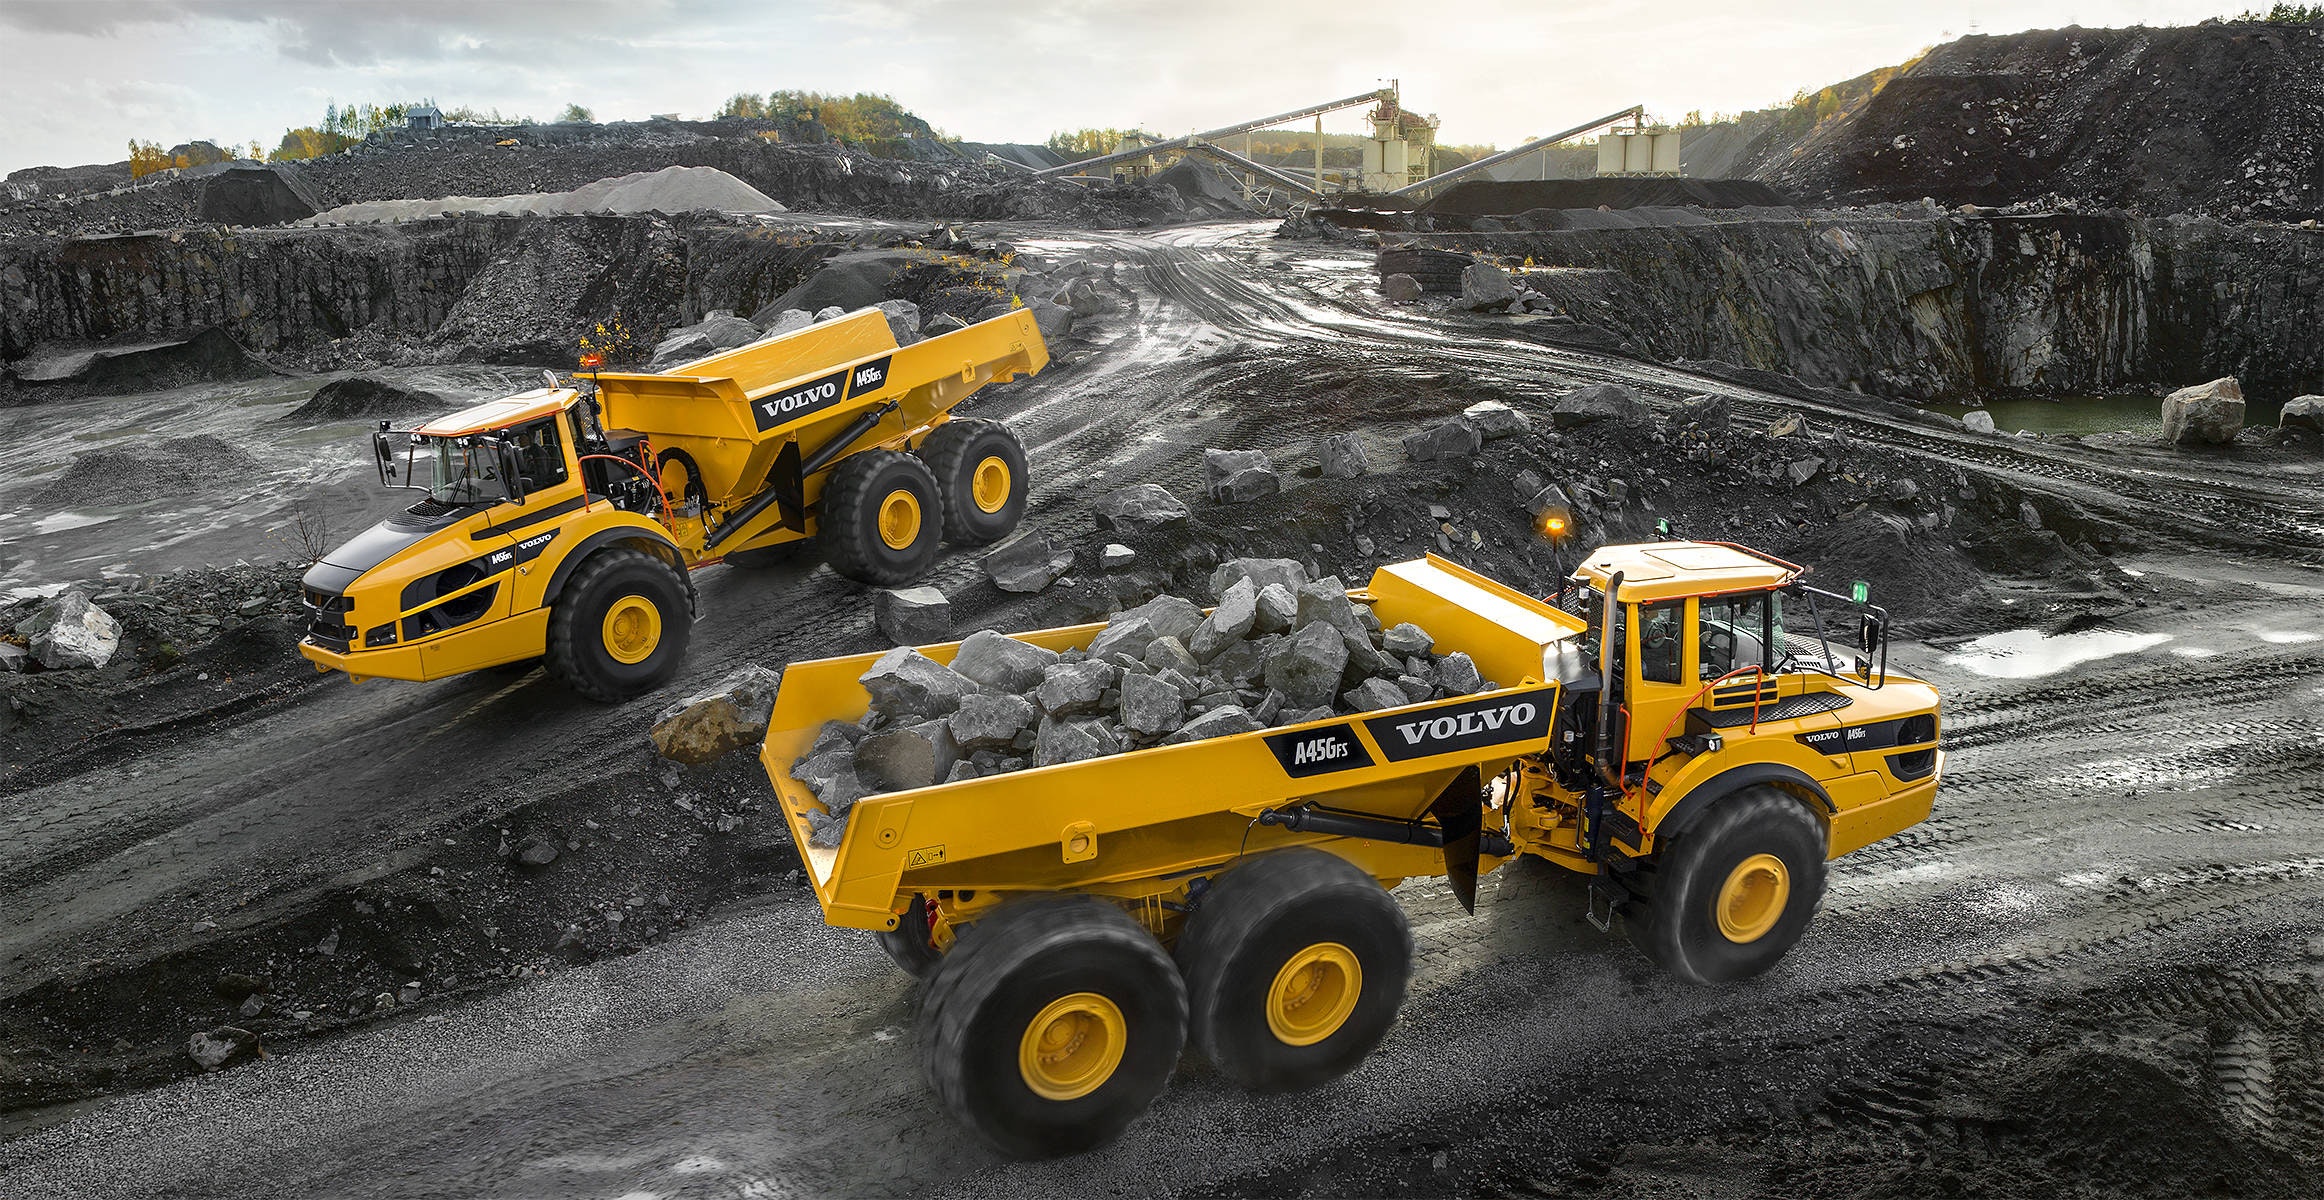 Two Volvo articulated haulers operating on a mining site